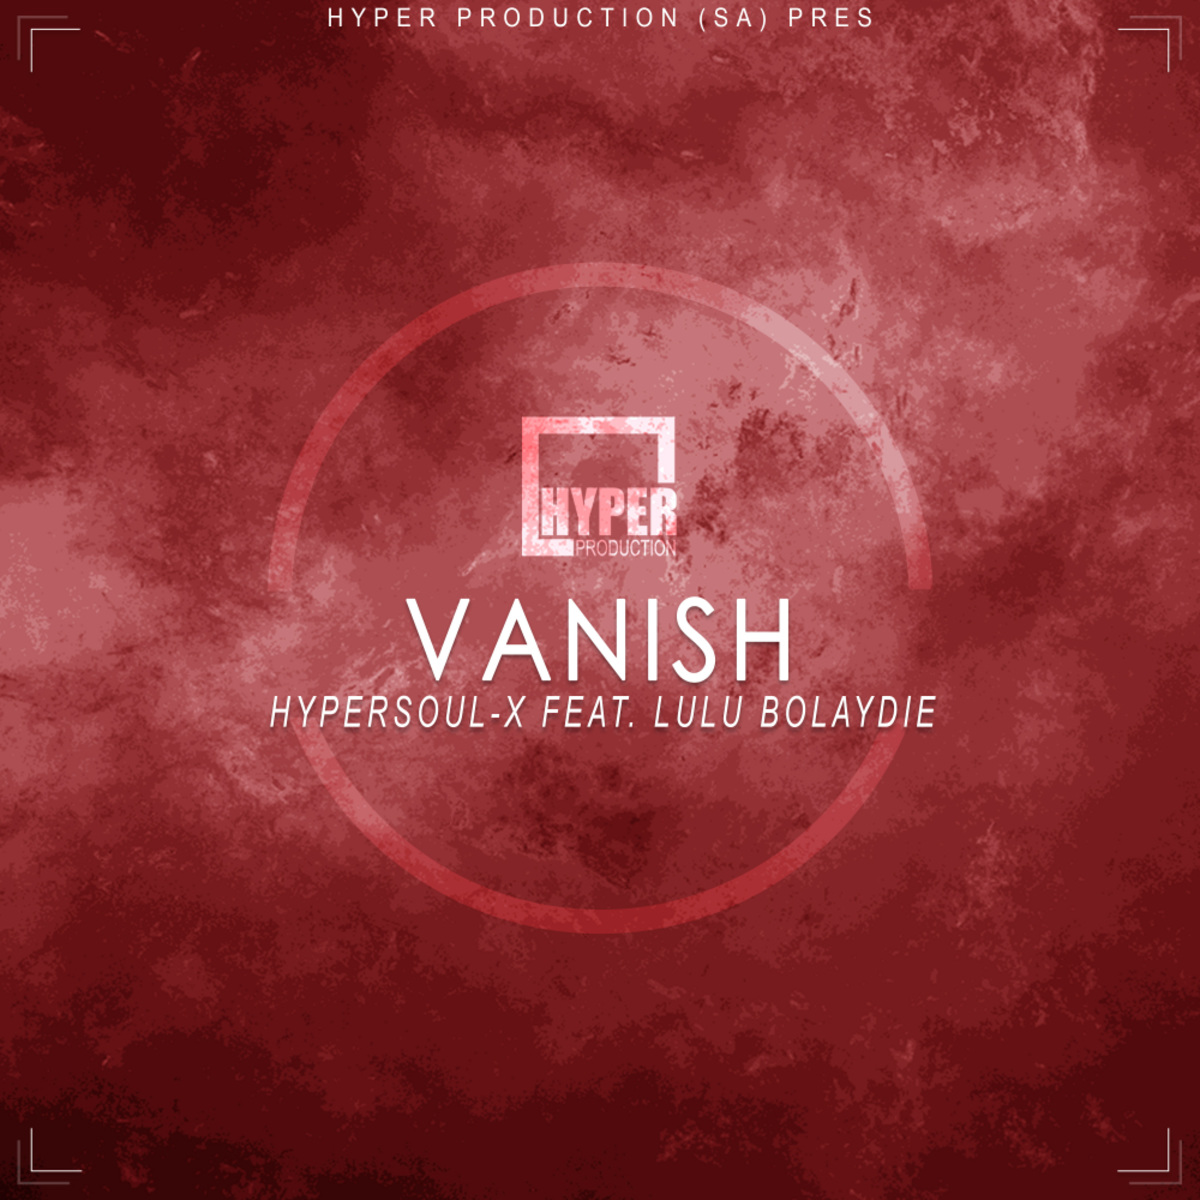 HyperSOUL-X ft Lulu Bolaydie - Vanish / Hyper Production (SA)